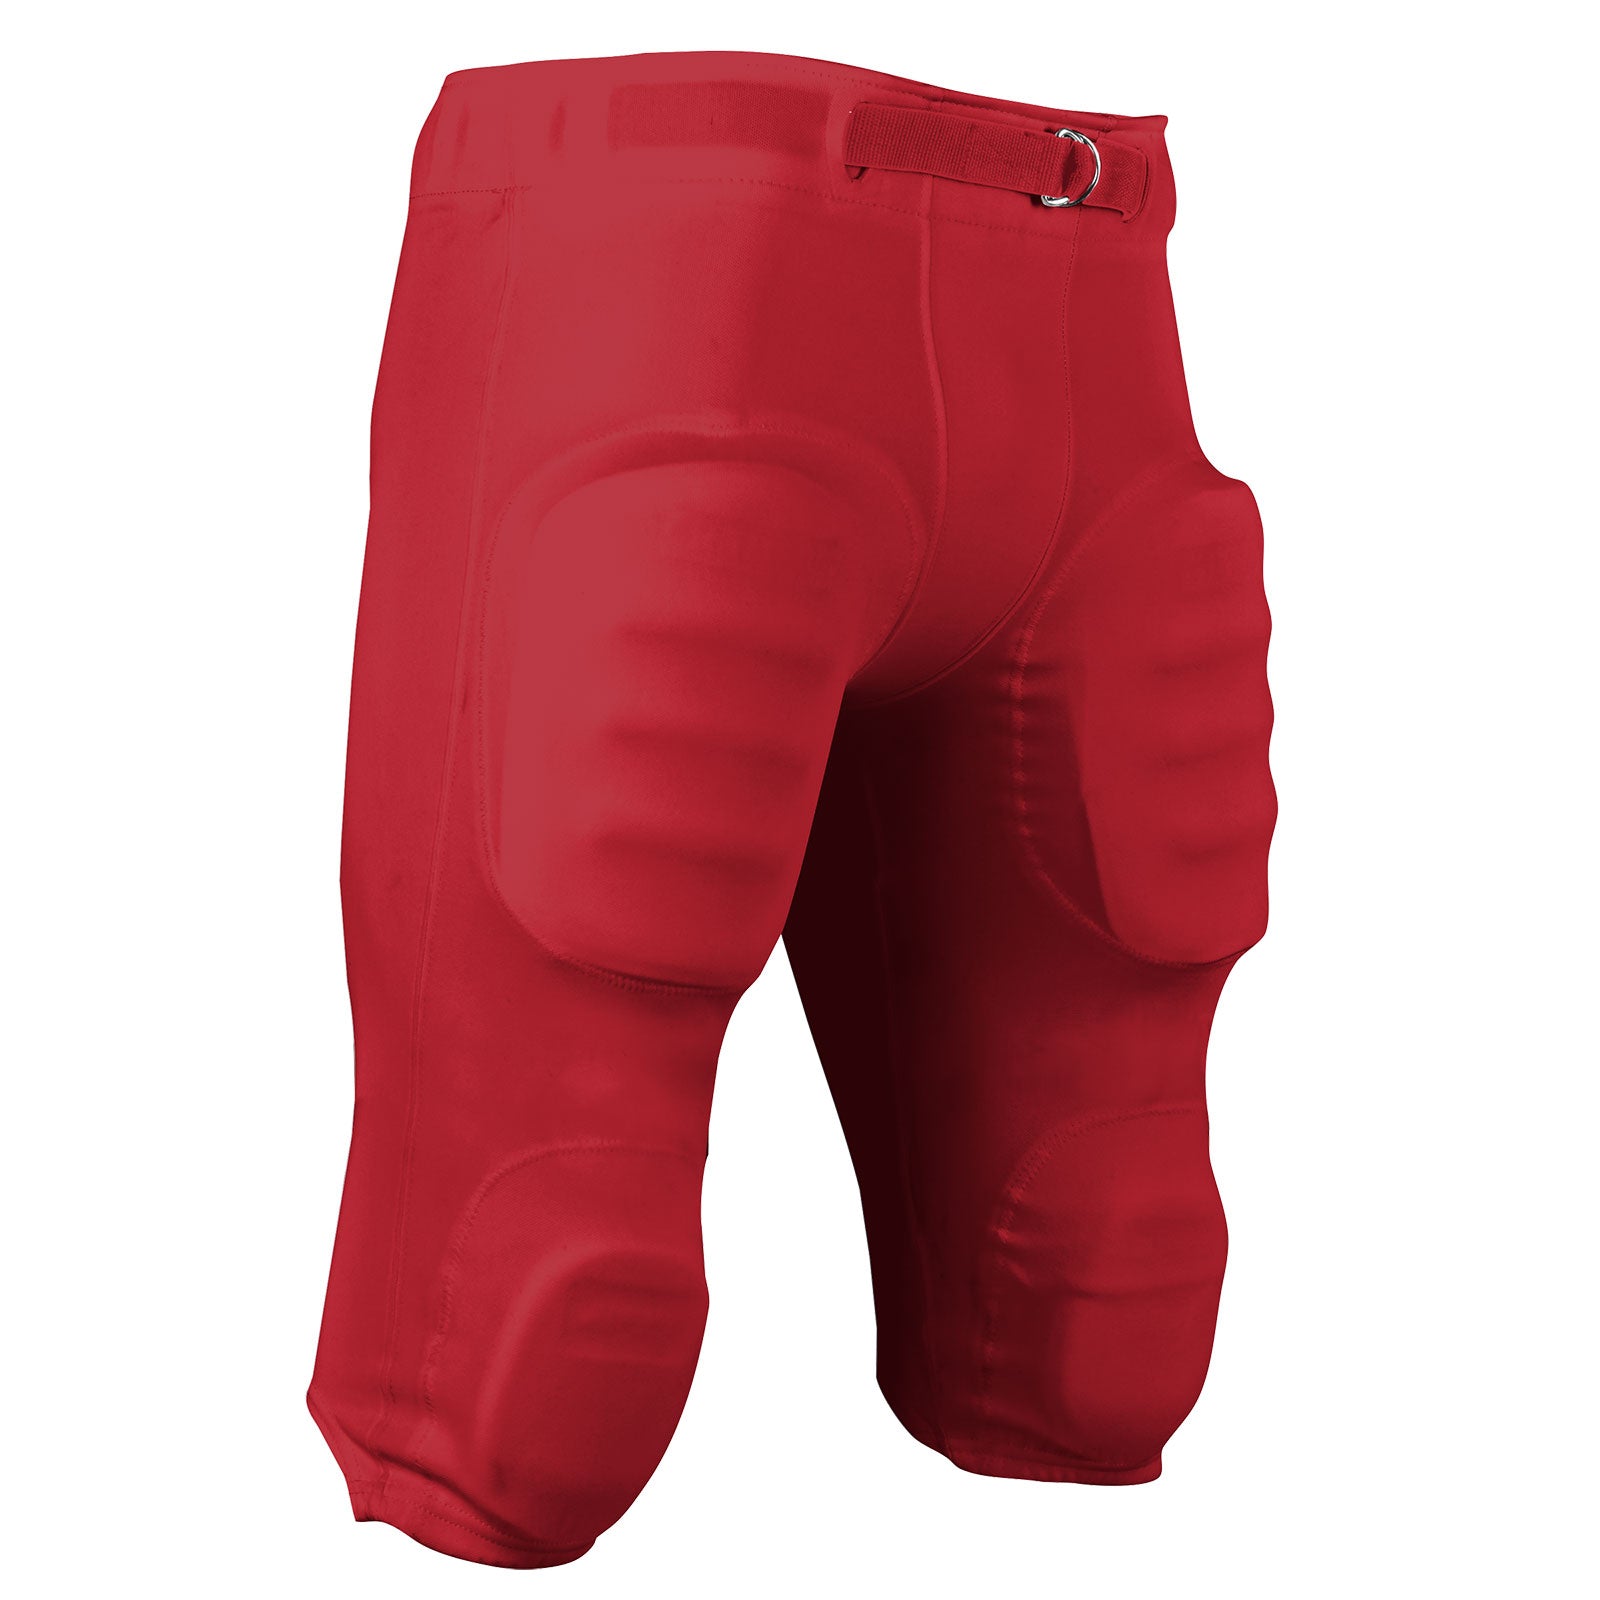 MM MP25 Athletic Practice Football Pant with Integrated Pads, Pants